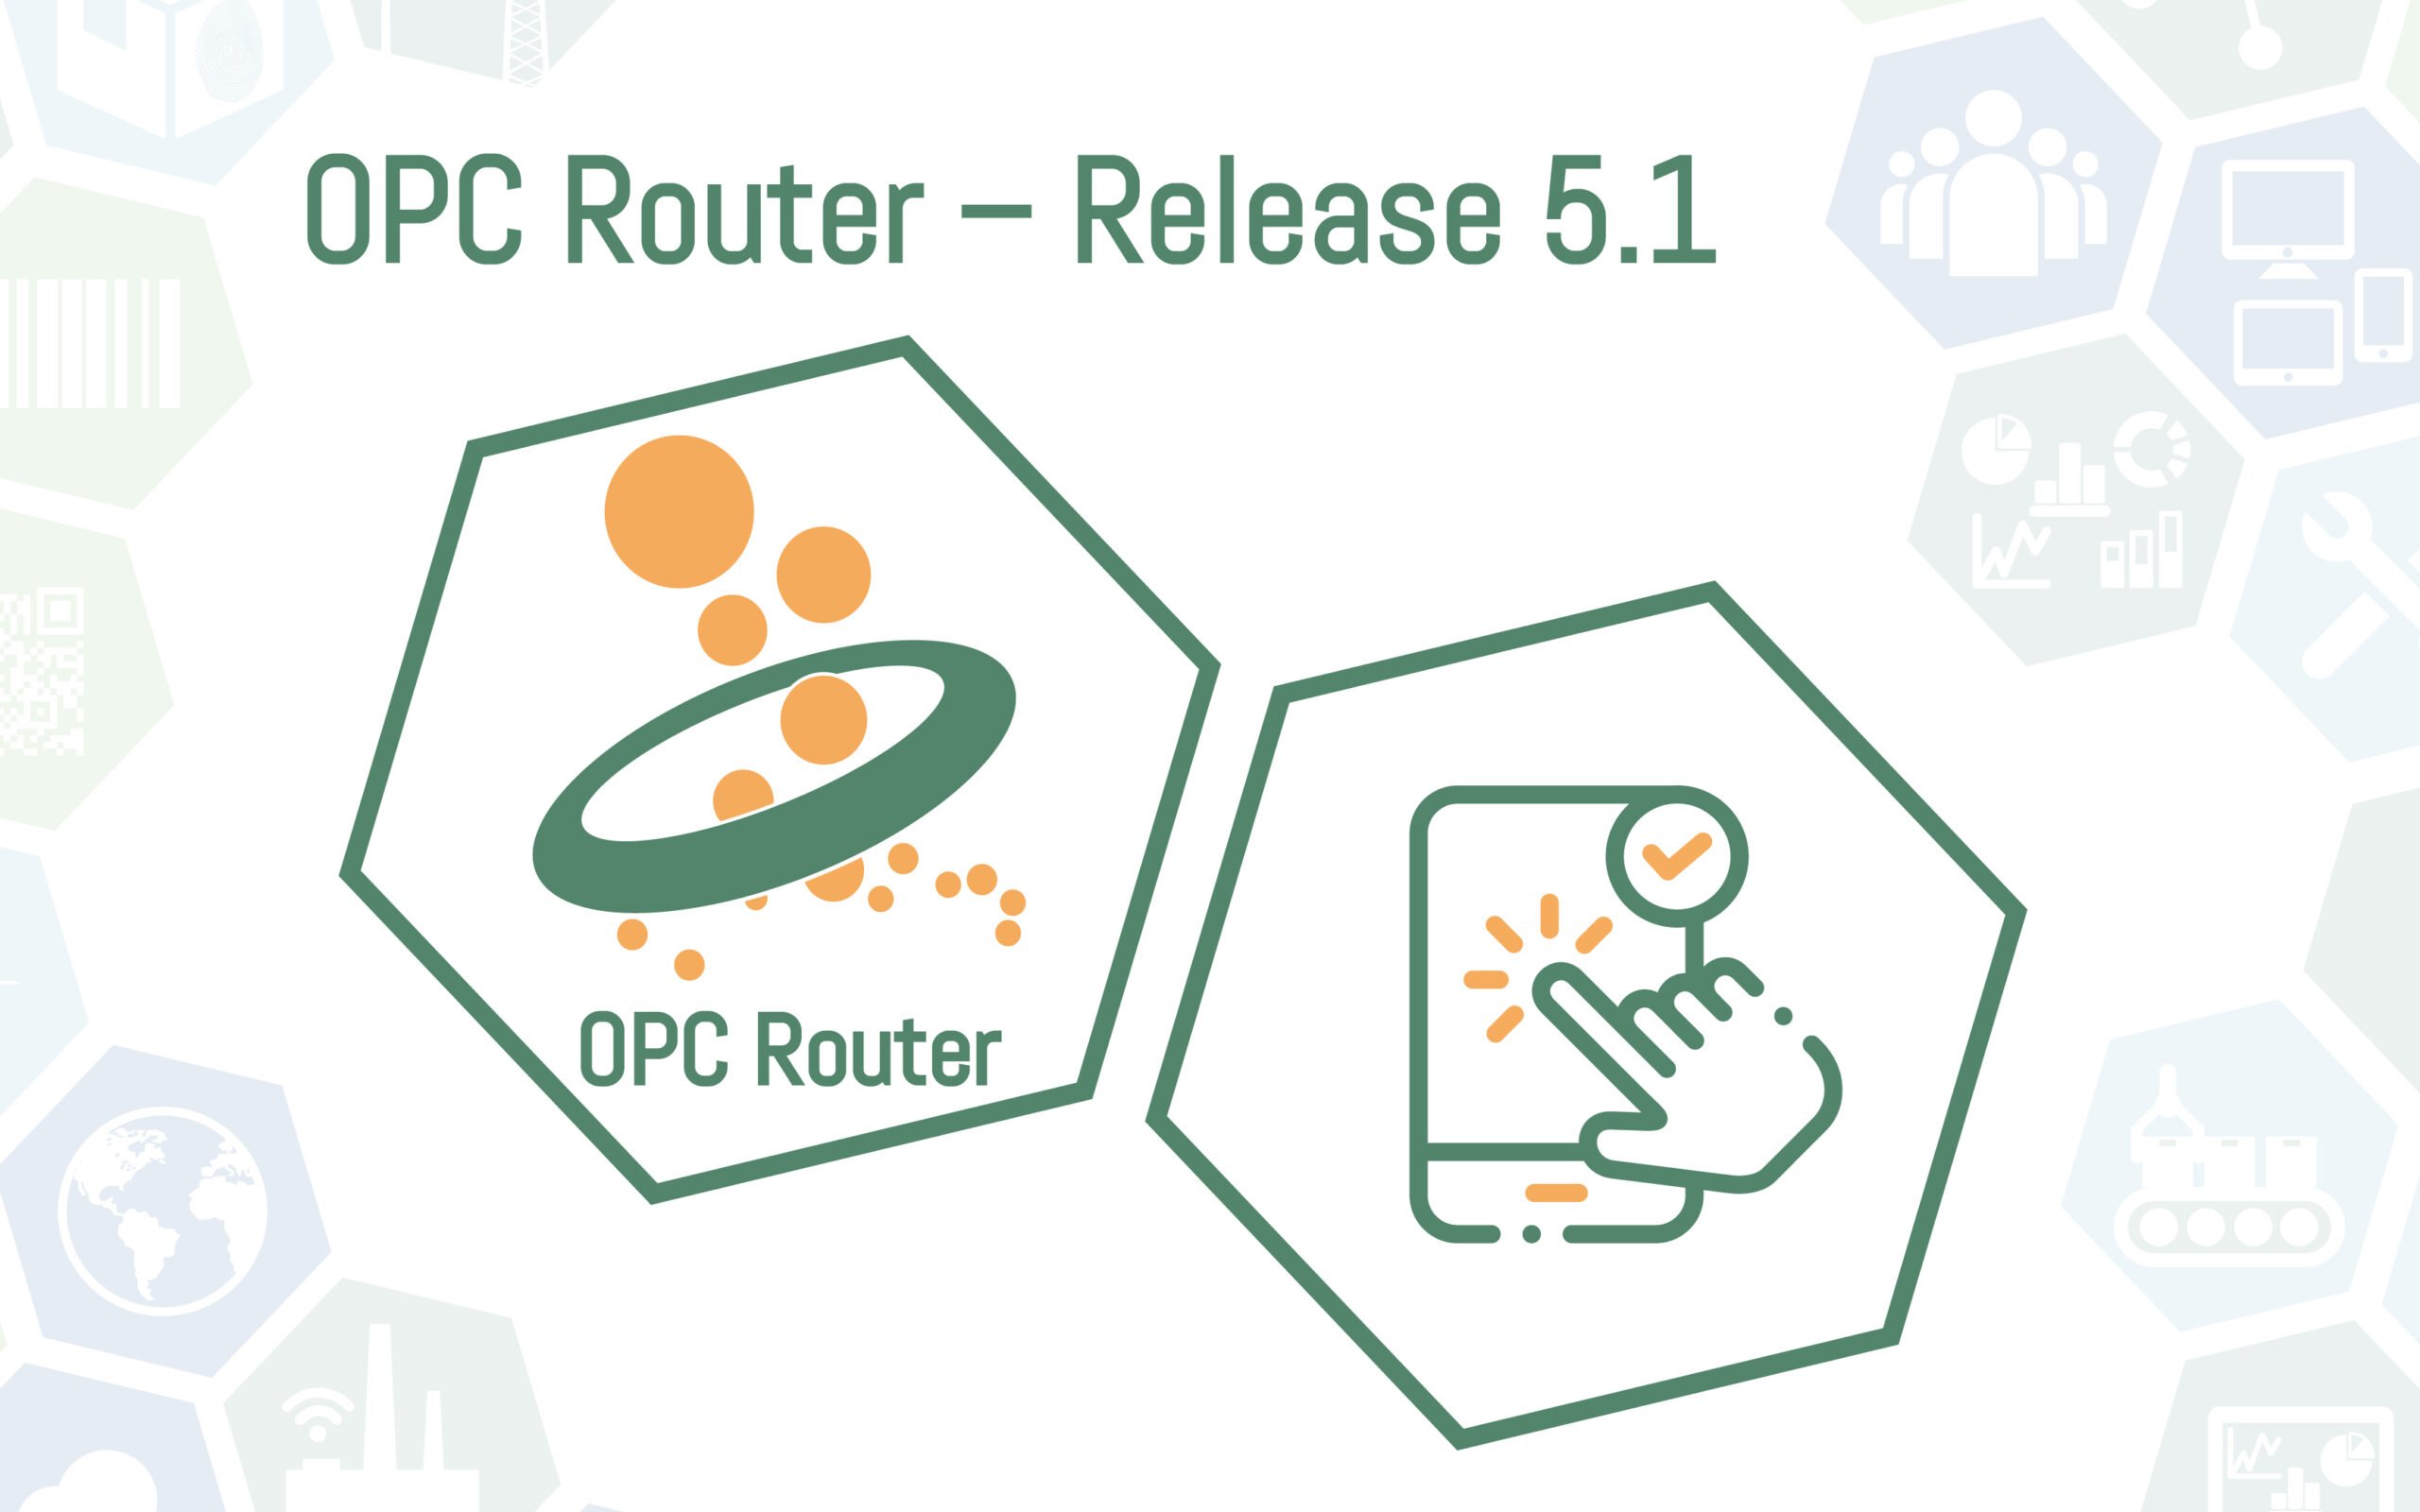 OPC Router Release 5.1